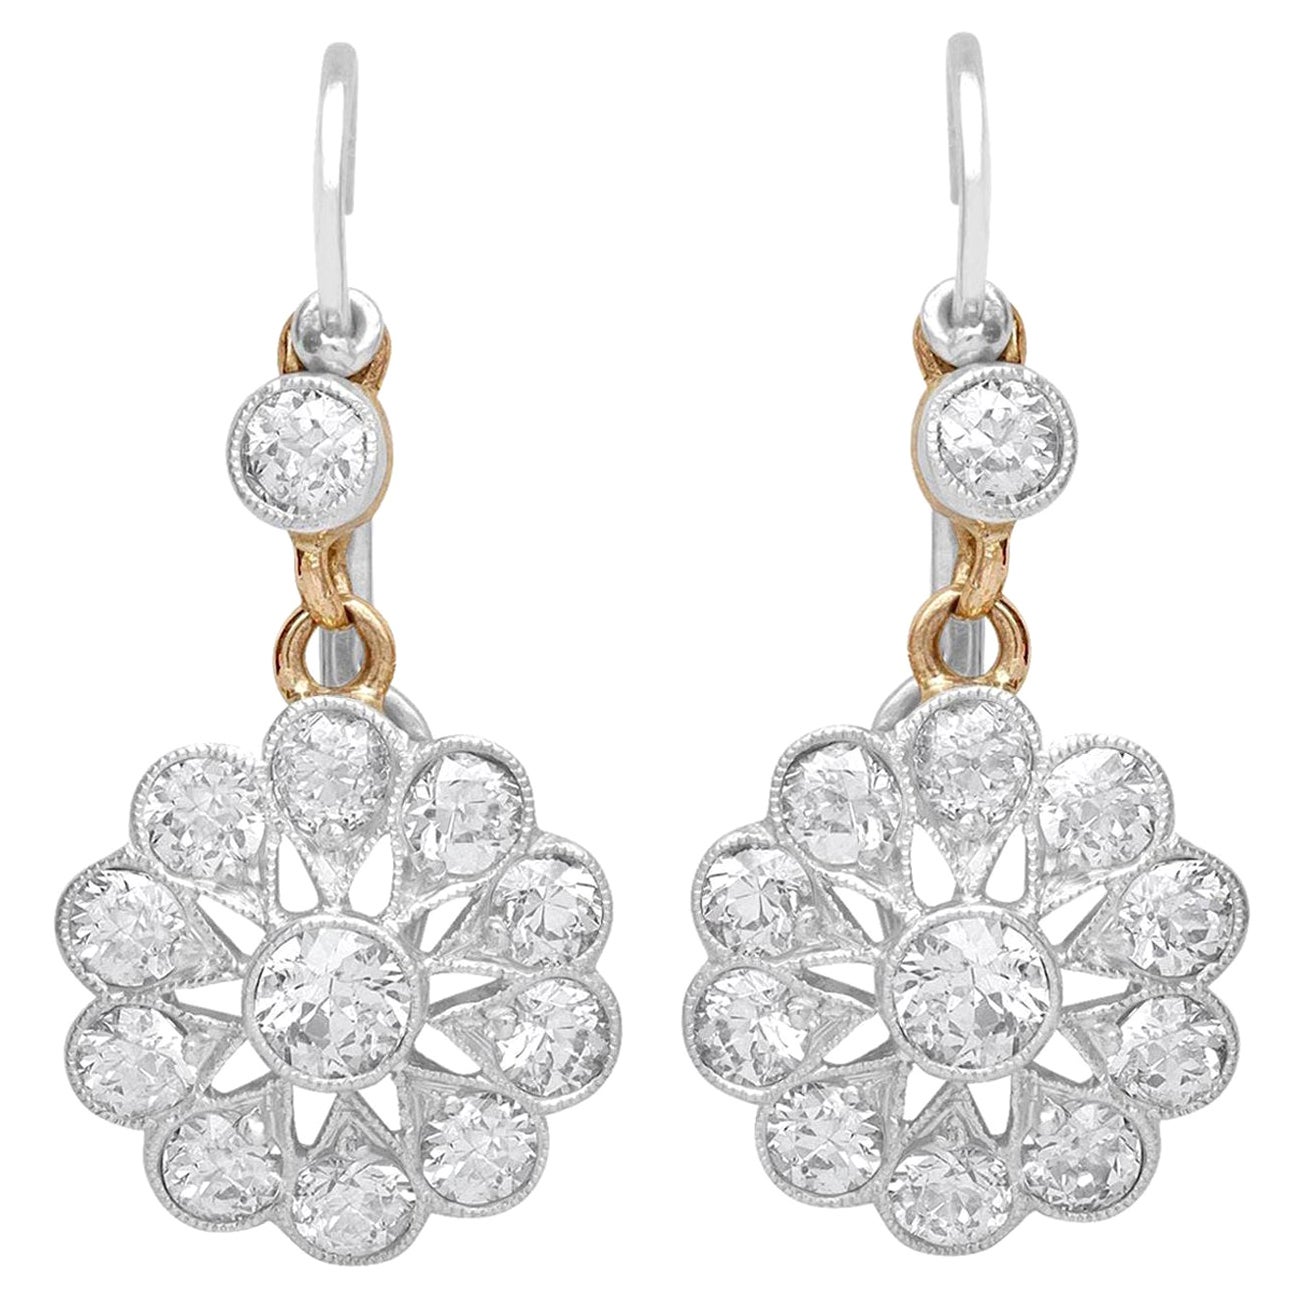 Antique 2.46Ct Diamond and 15k Yellow Gold Cluster Earrings, Circa 1920